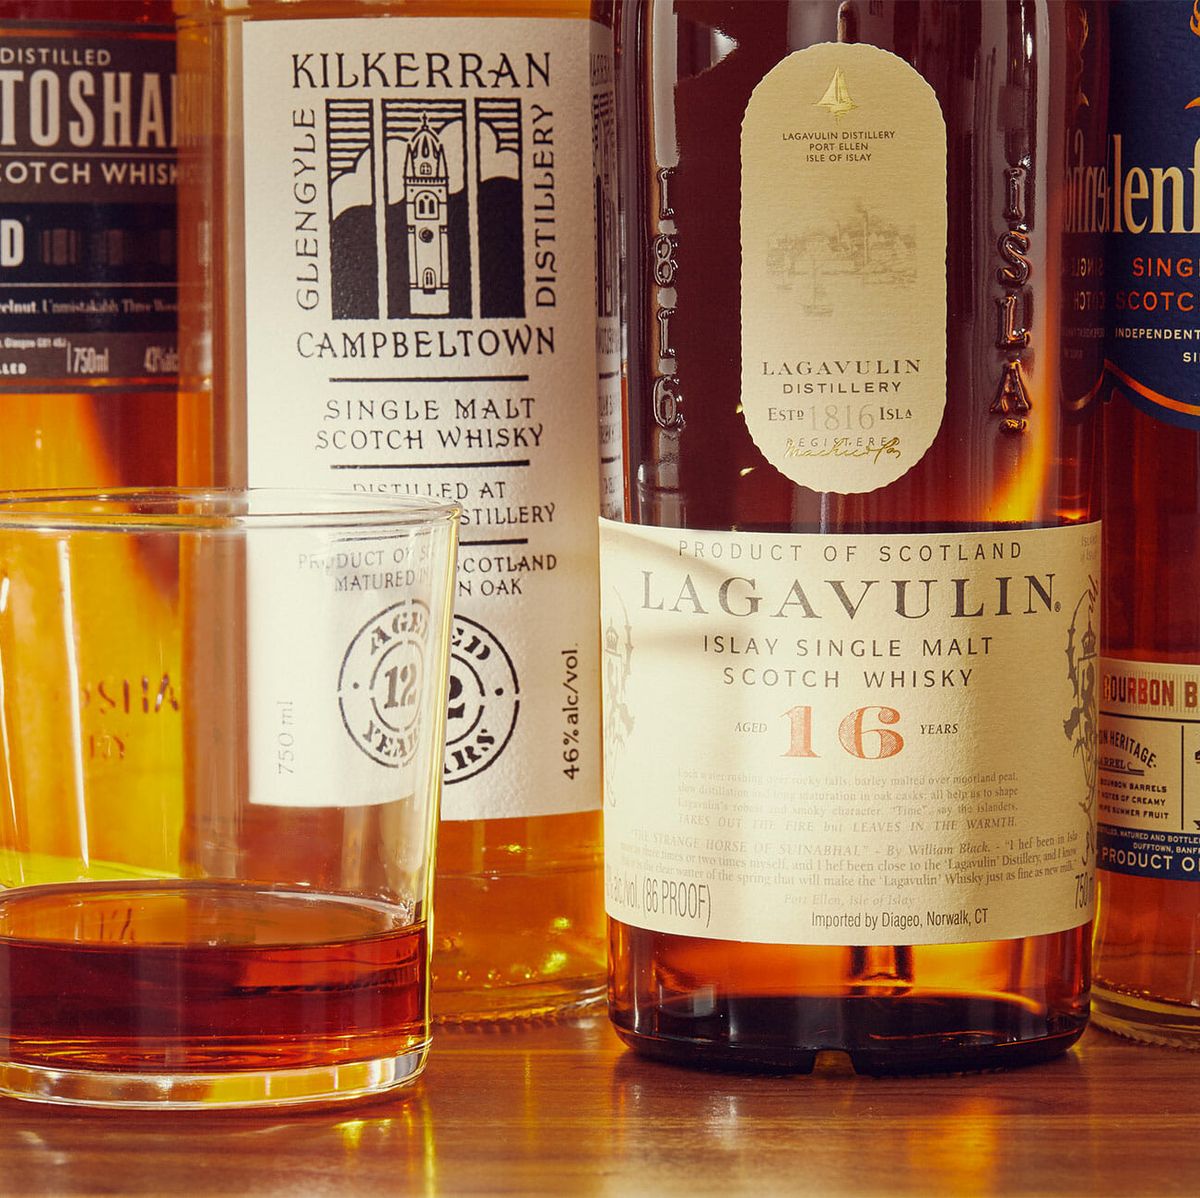 Kwade trouw versus Fluisteren The 22 Best Scotch Whiskies You Can Drink Right Now